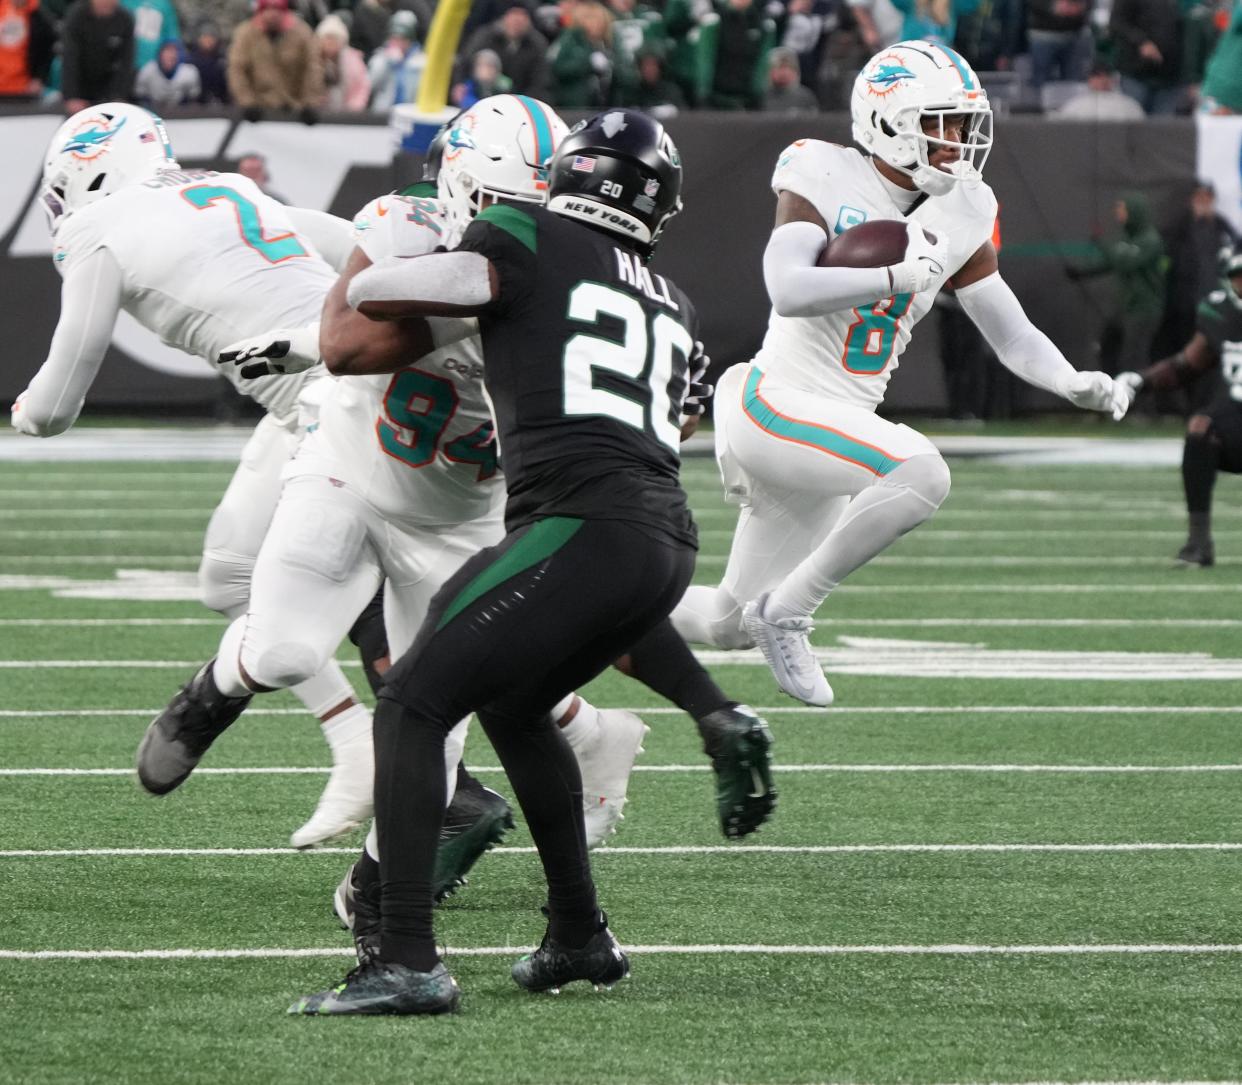 East Rutherford, NJ â€” November 24, 2023 -- Jevon Holland of Miami returns a last second inception 100 yards for a TD in the first half. The NY Jets host the Miami Dolphins at MetLife Stadium on November 24, 2023 in East Rutherford, NJ to play in the first â€œBlack Fridayâ€ NFL game.